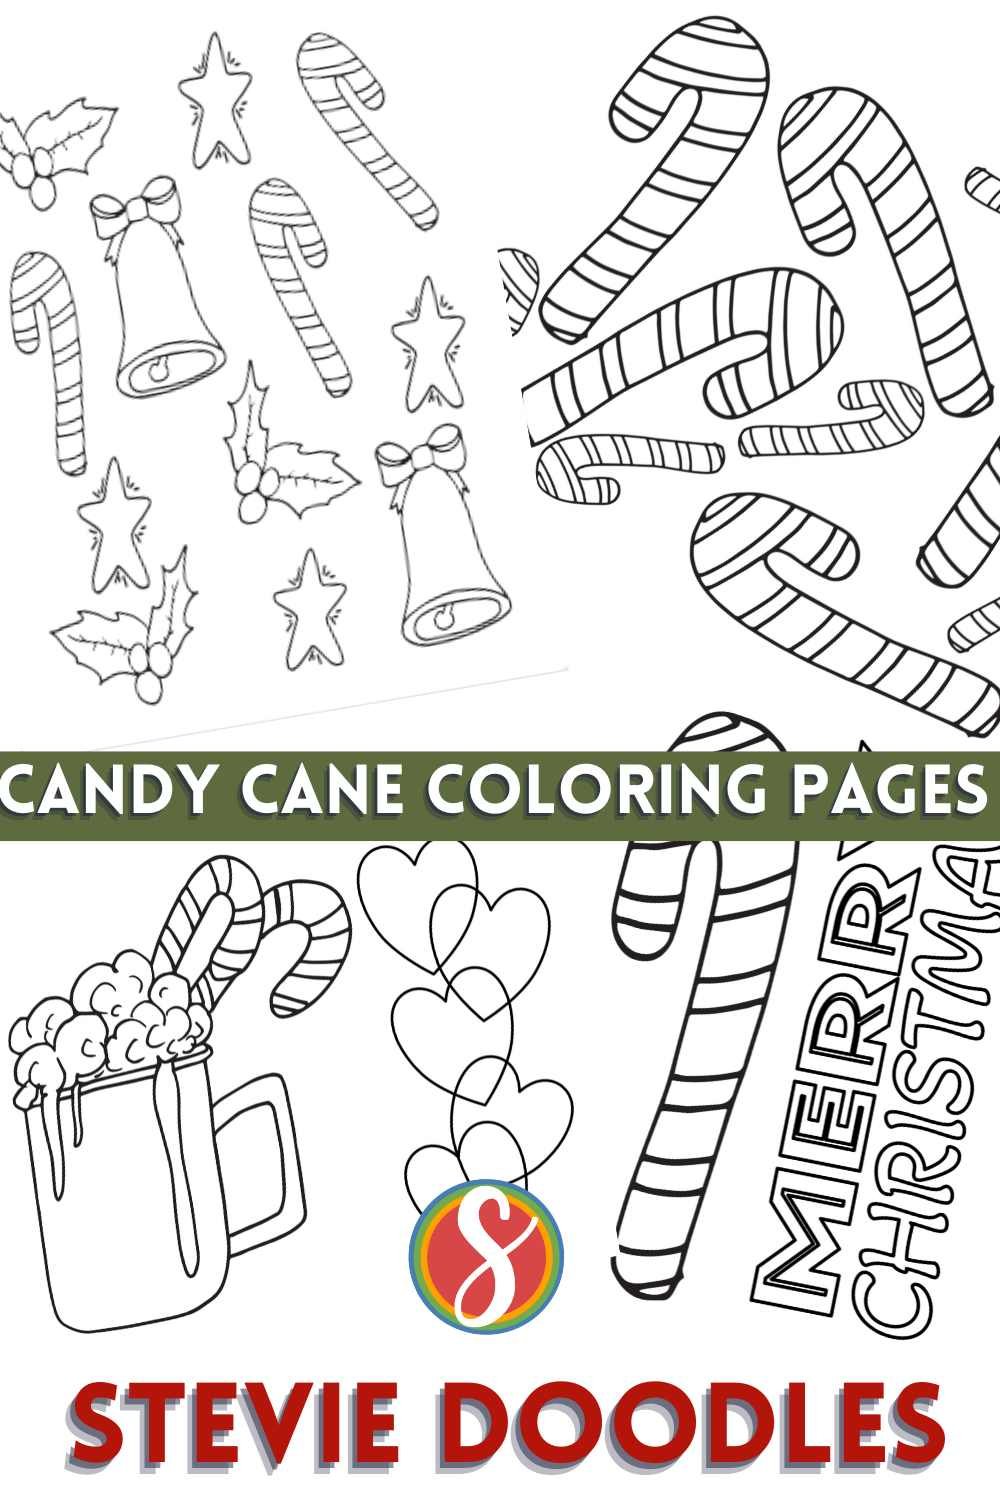 Free candy cane coloring pages â stevie doodles